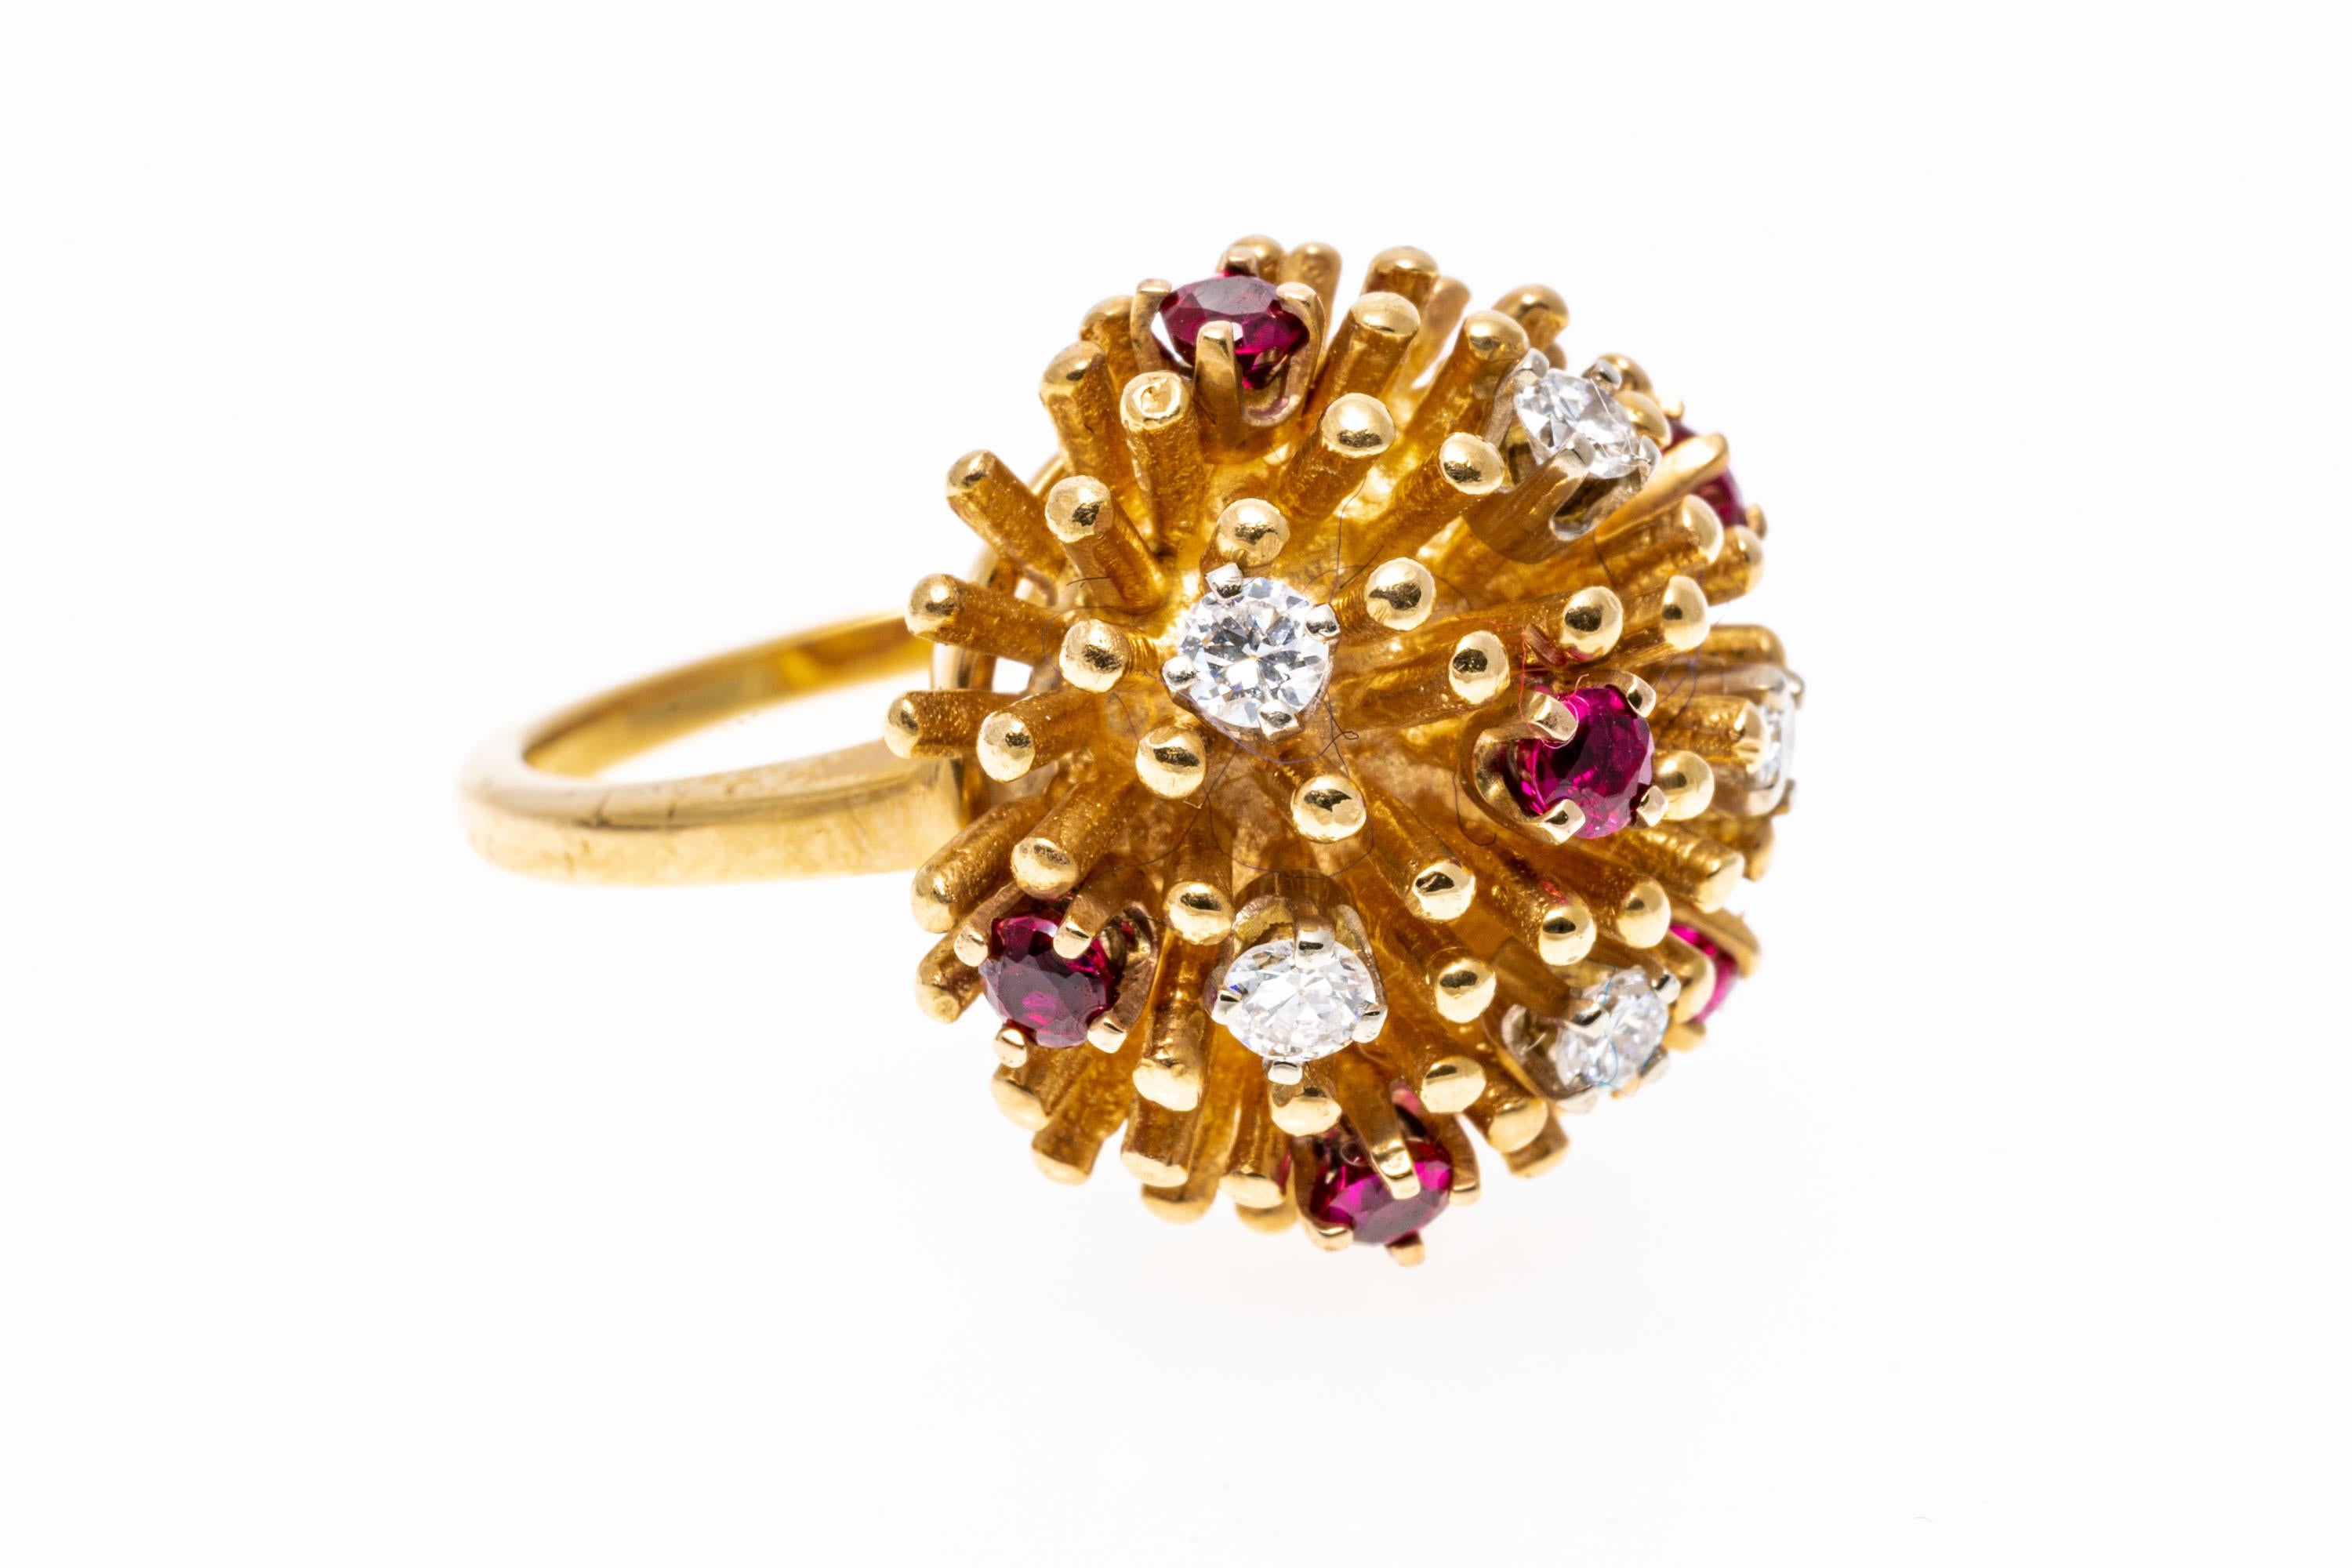 14k yellow gold ring. This fabulous round mini anemone style ring is set with yellow gold spines, decorated with scattered round faceted, pinkish red color rubies, approximately 0.30 TCW and round faceted diamonds, approximately 0.15 TCW, and prong